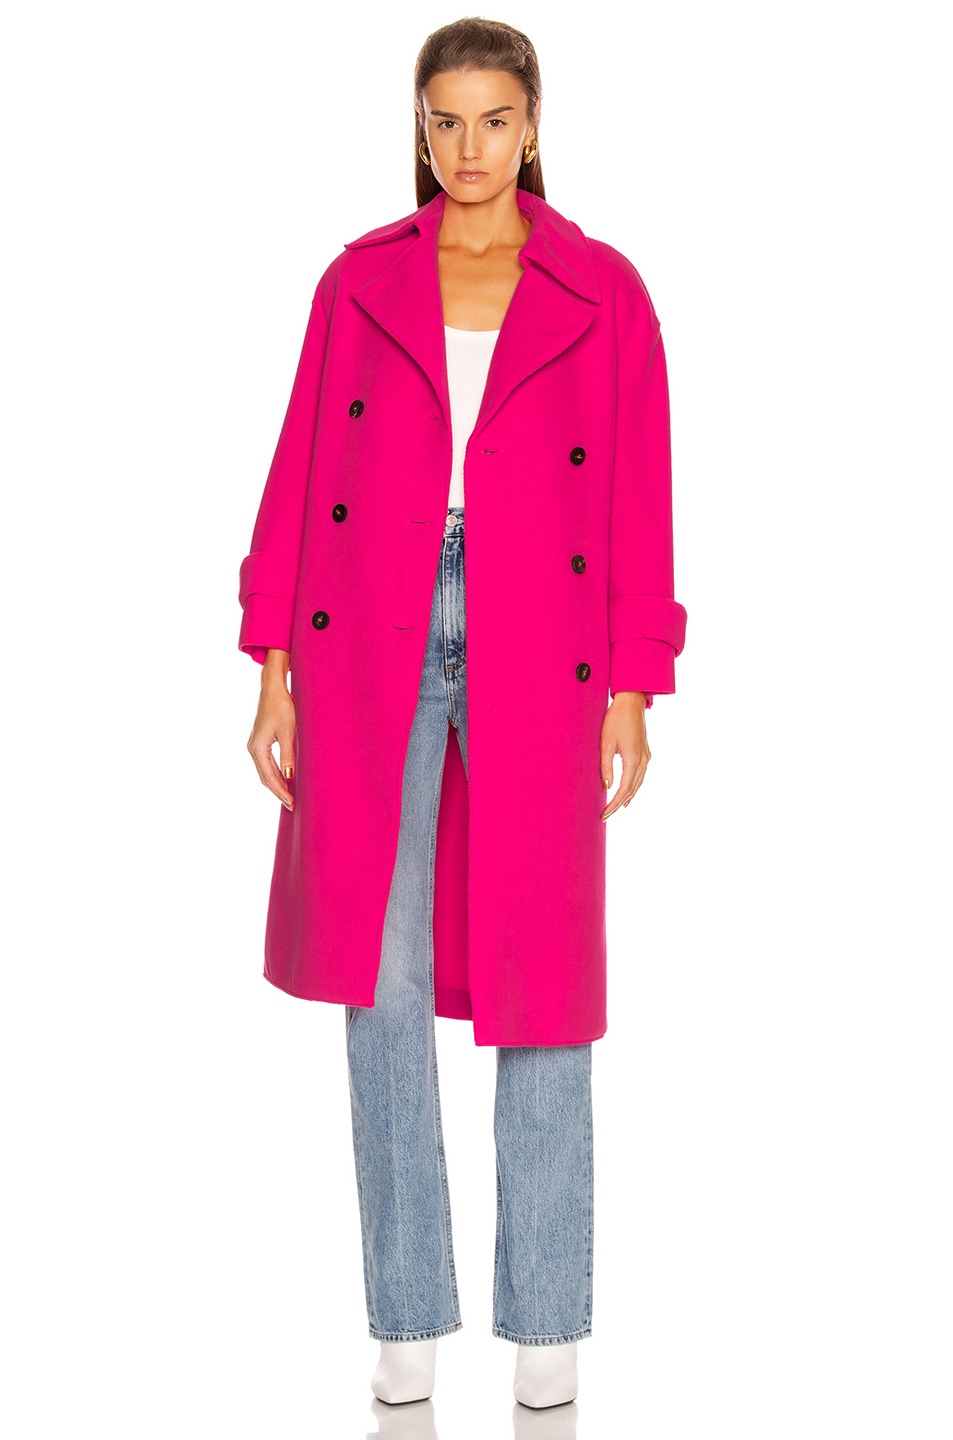 Image 1 of Harris Wharf London Oversized Trench Coat in Pink Neon